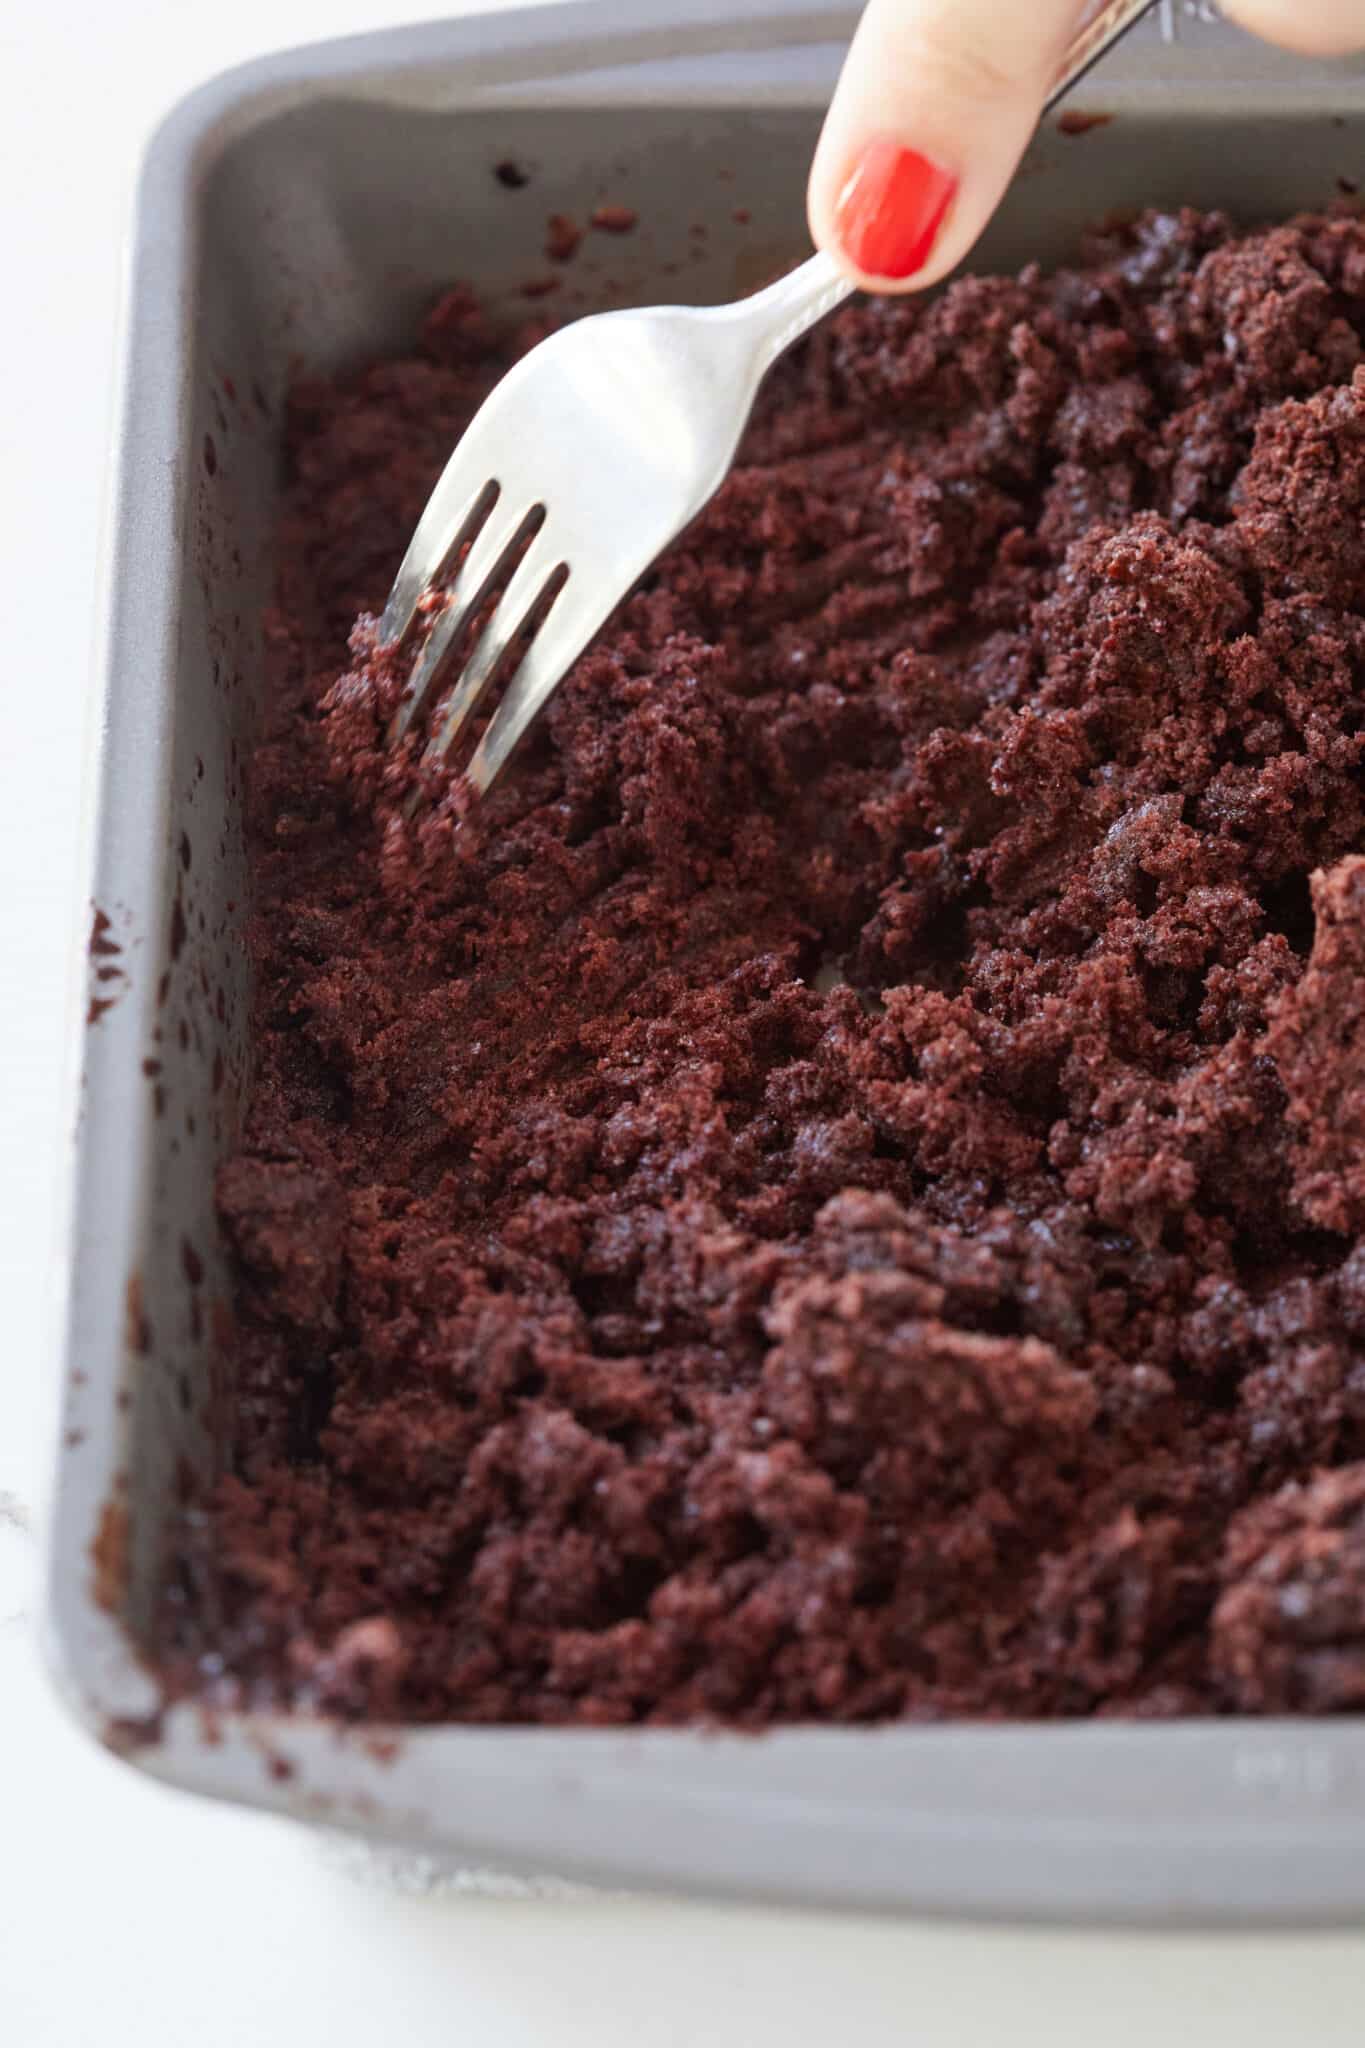 Step-by-step instructions on how to make chocolate granita: use a fork to crape the frozen chocolate mixture and repeat until it has fully formed into ice shards.